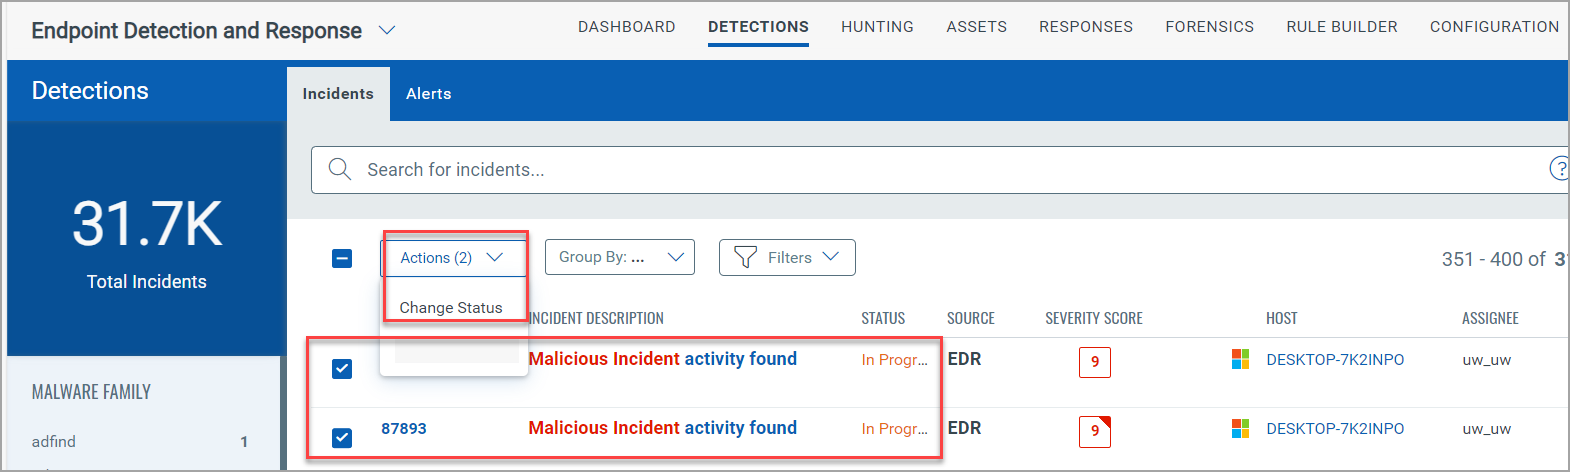 Change Status option in Incidents tab.